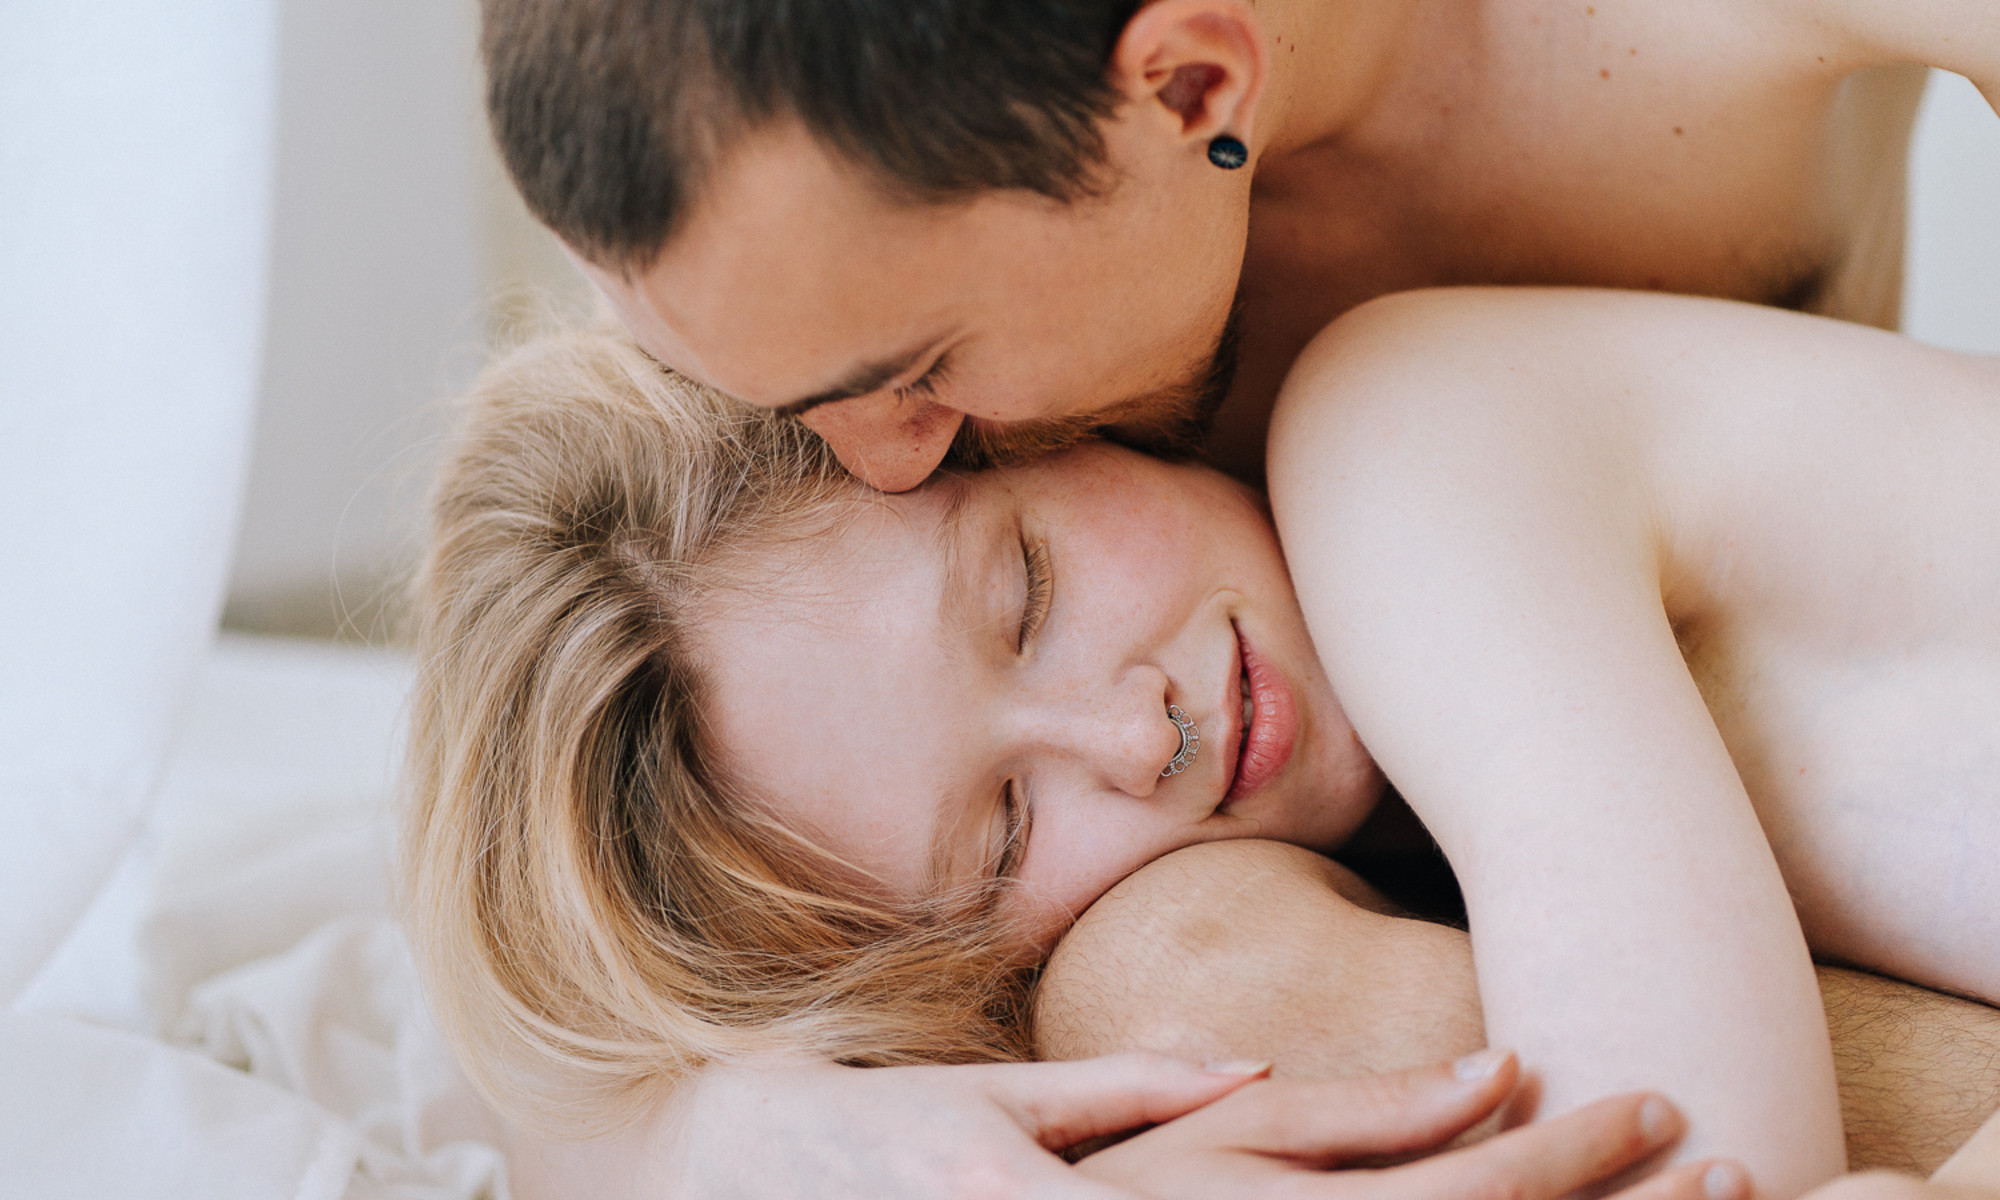 How To Please A Woman The 5 Things Women Want In Bed mindbodygreen